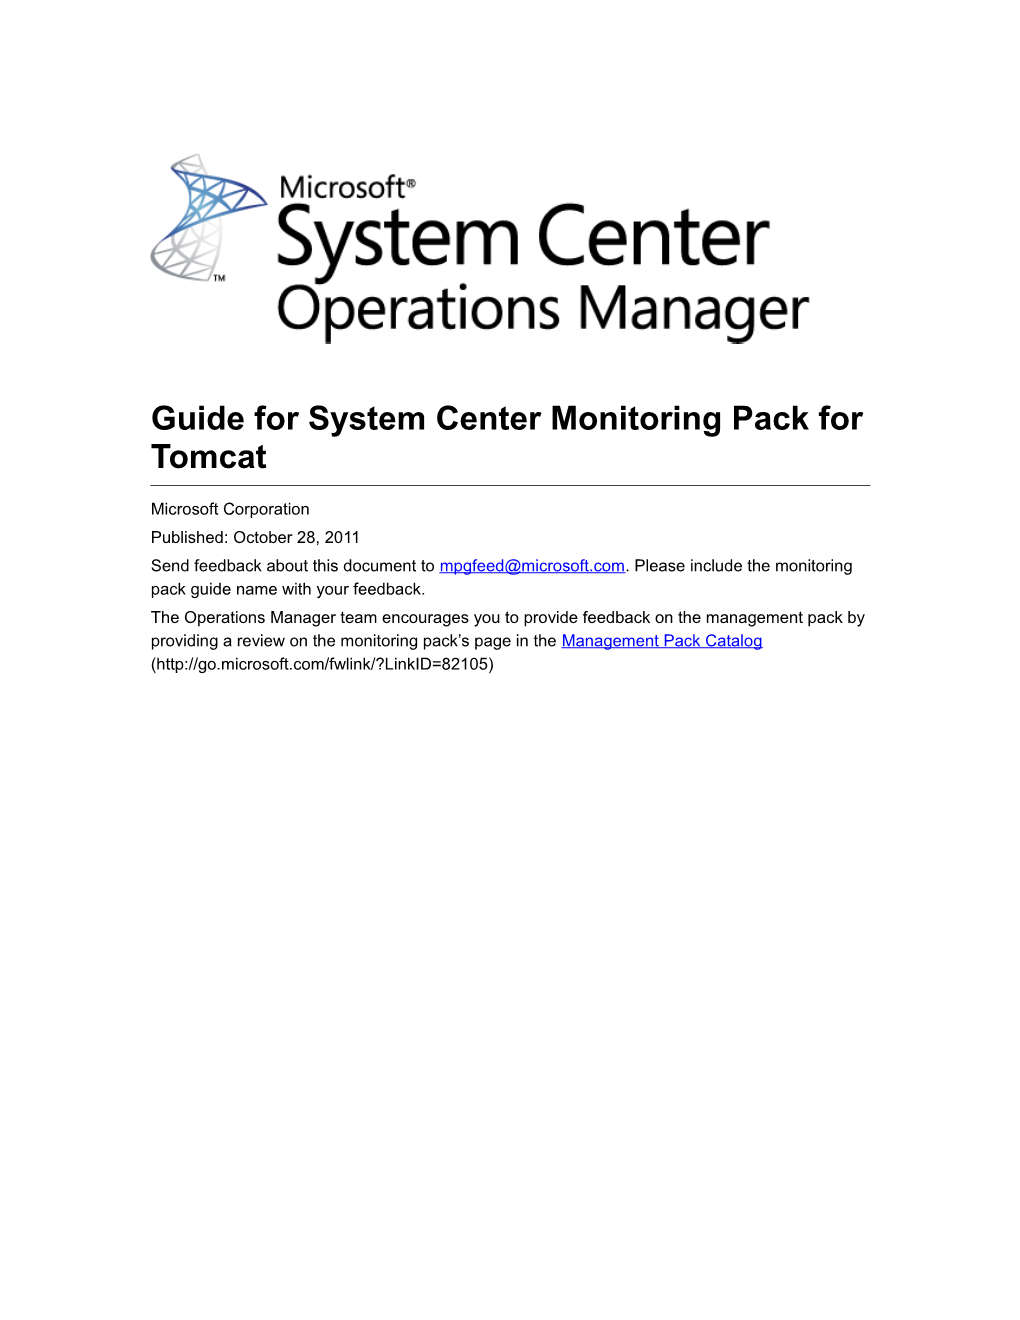 Guide for System Center Monitoring Pack for Tomcat